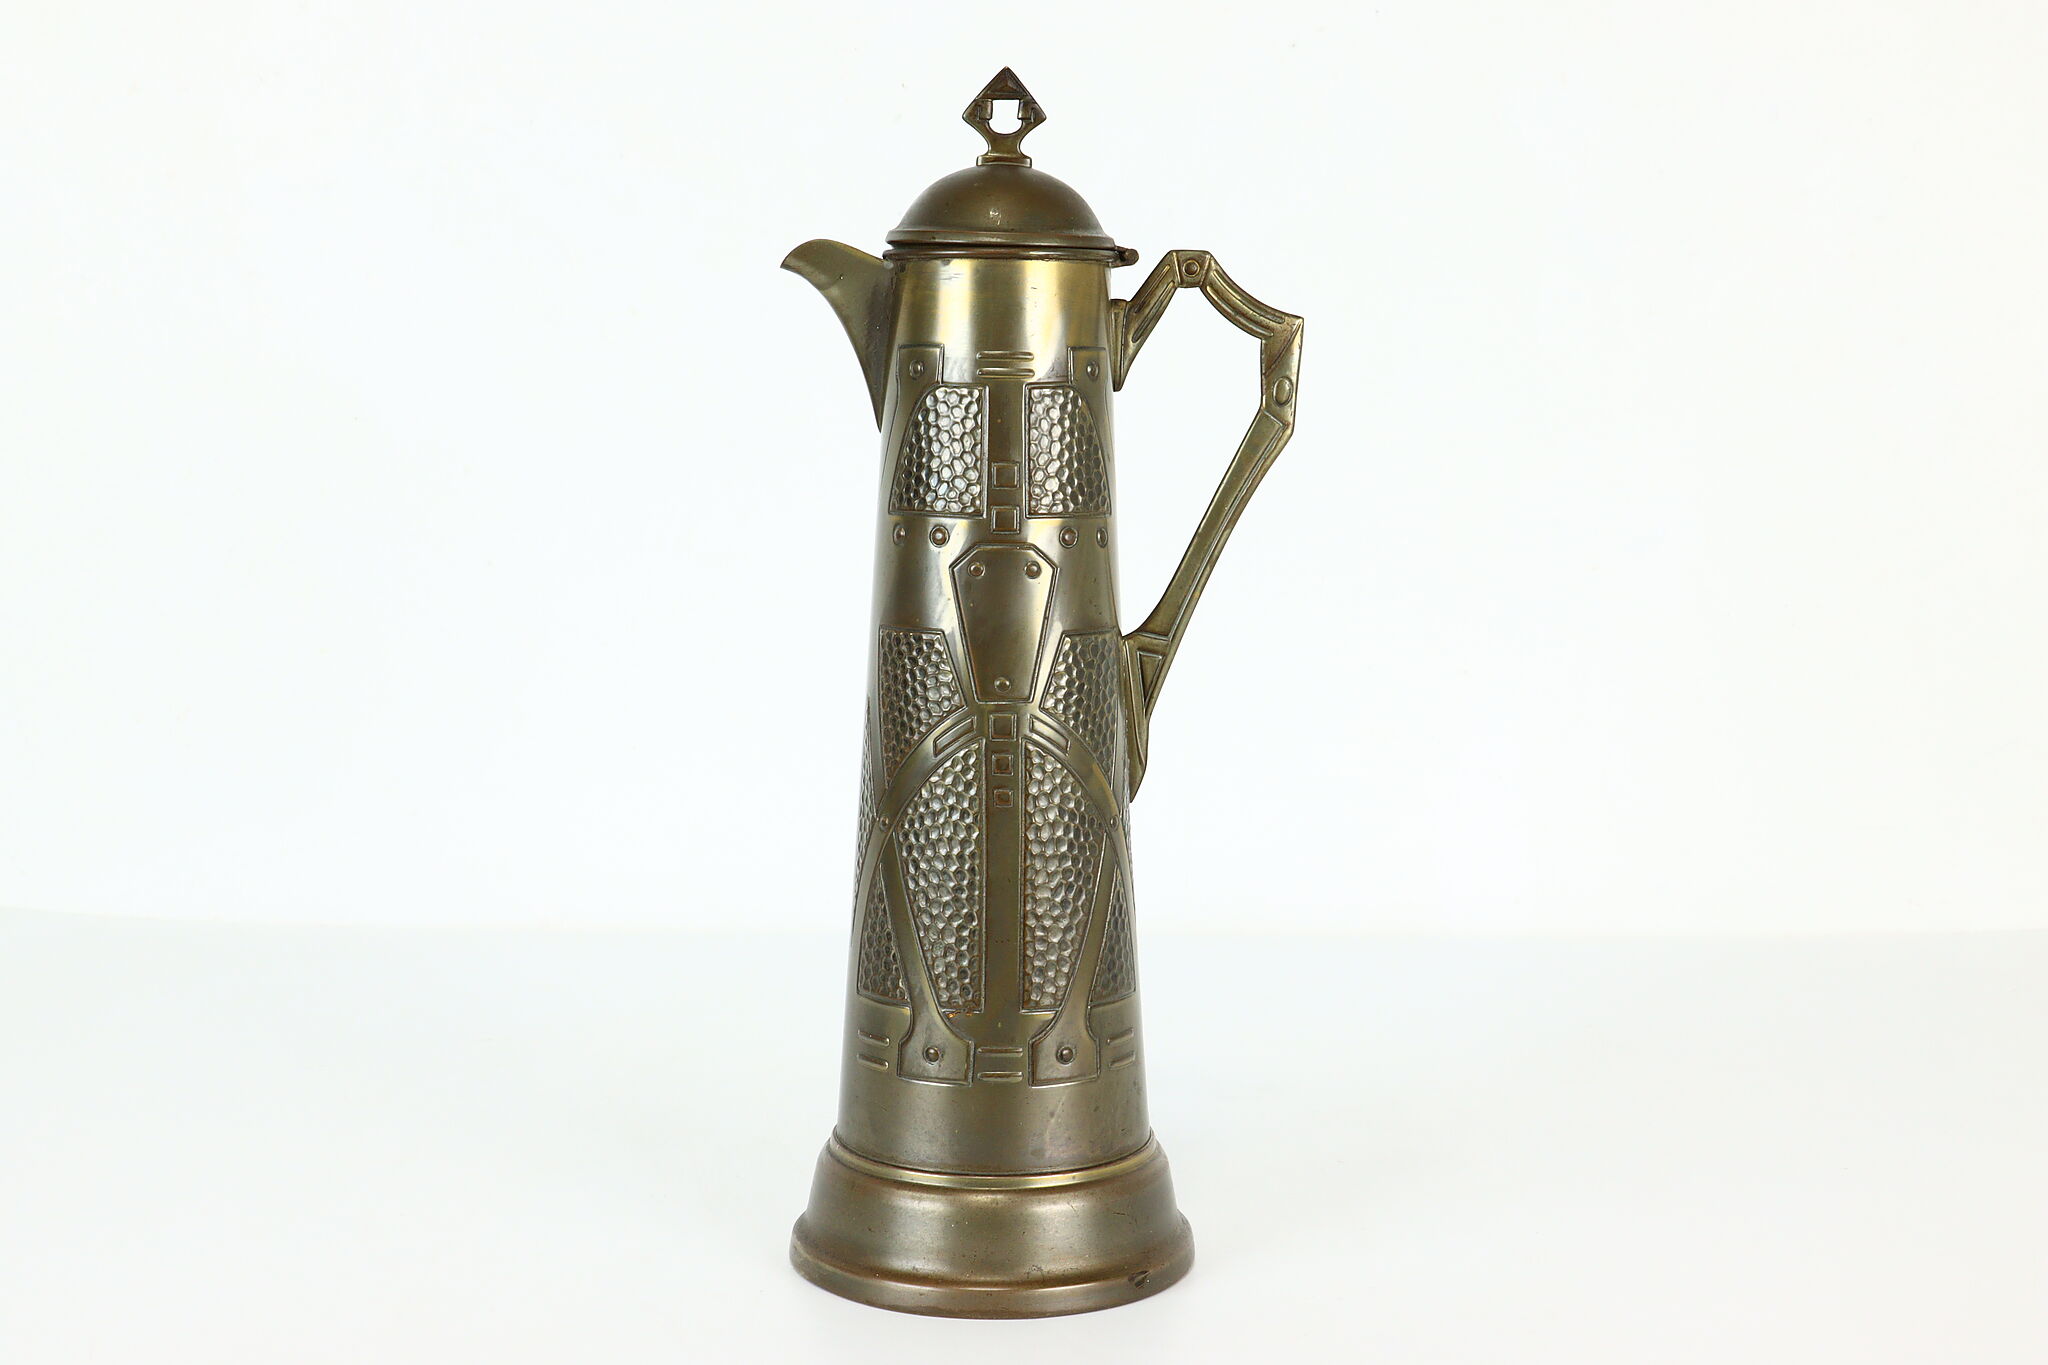 Brass Pitcher with Lid